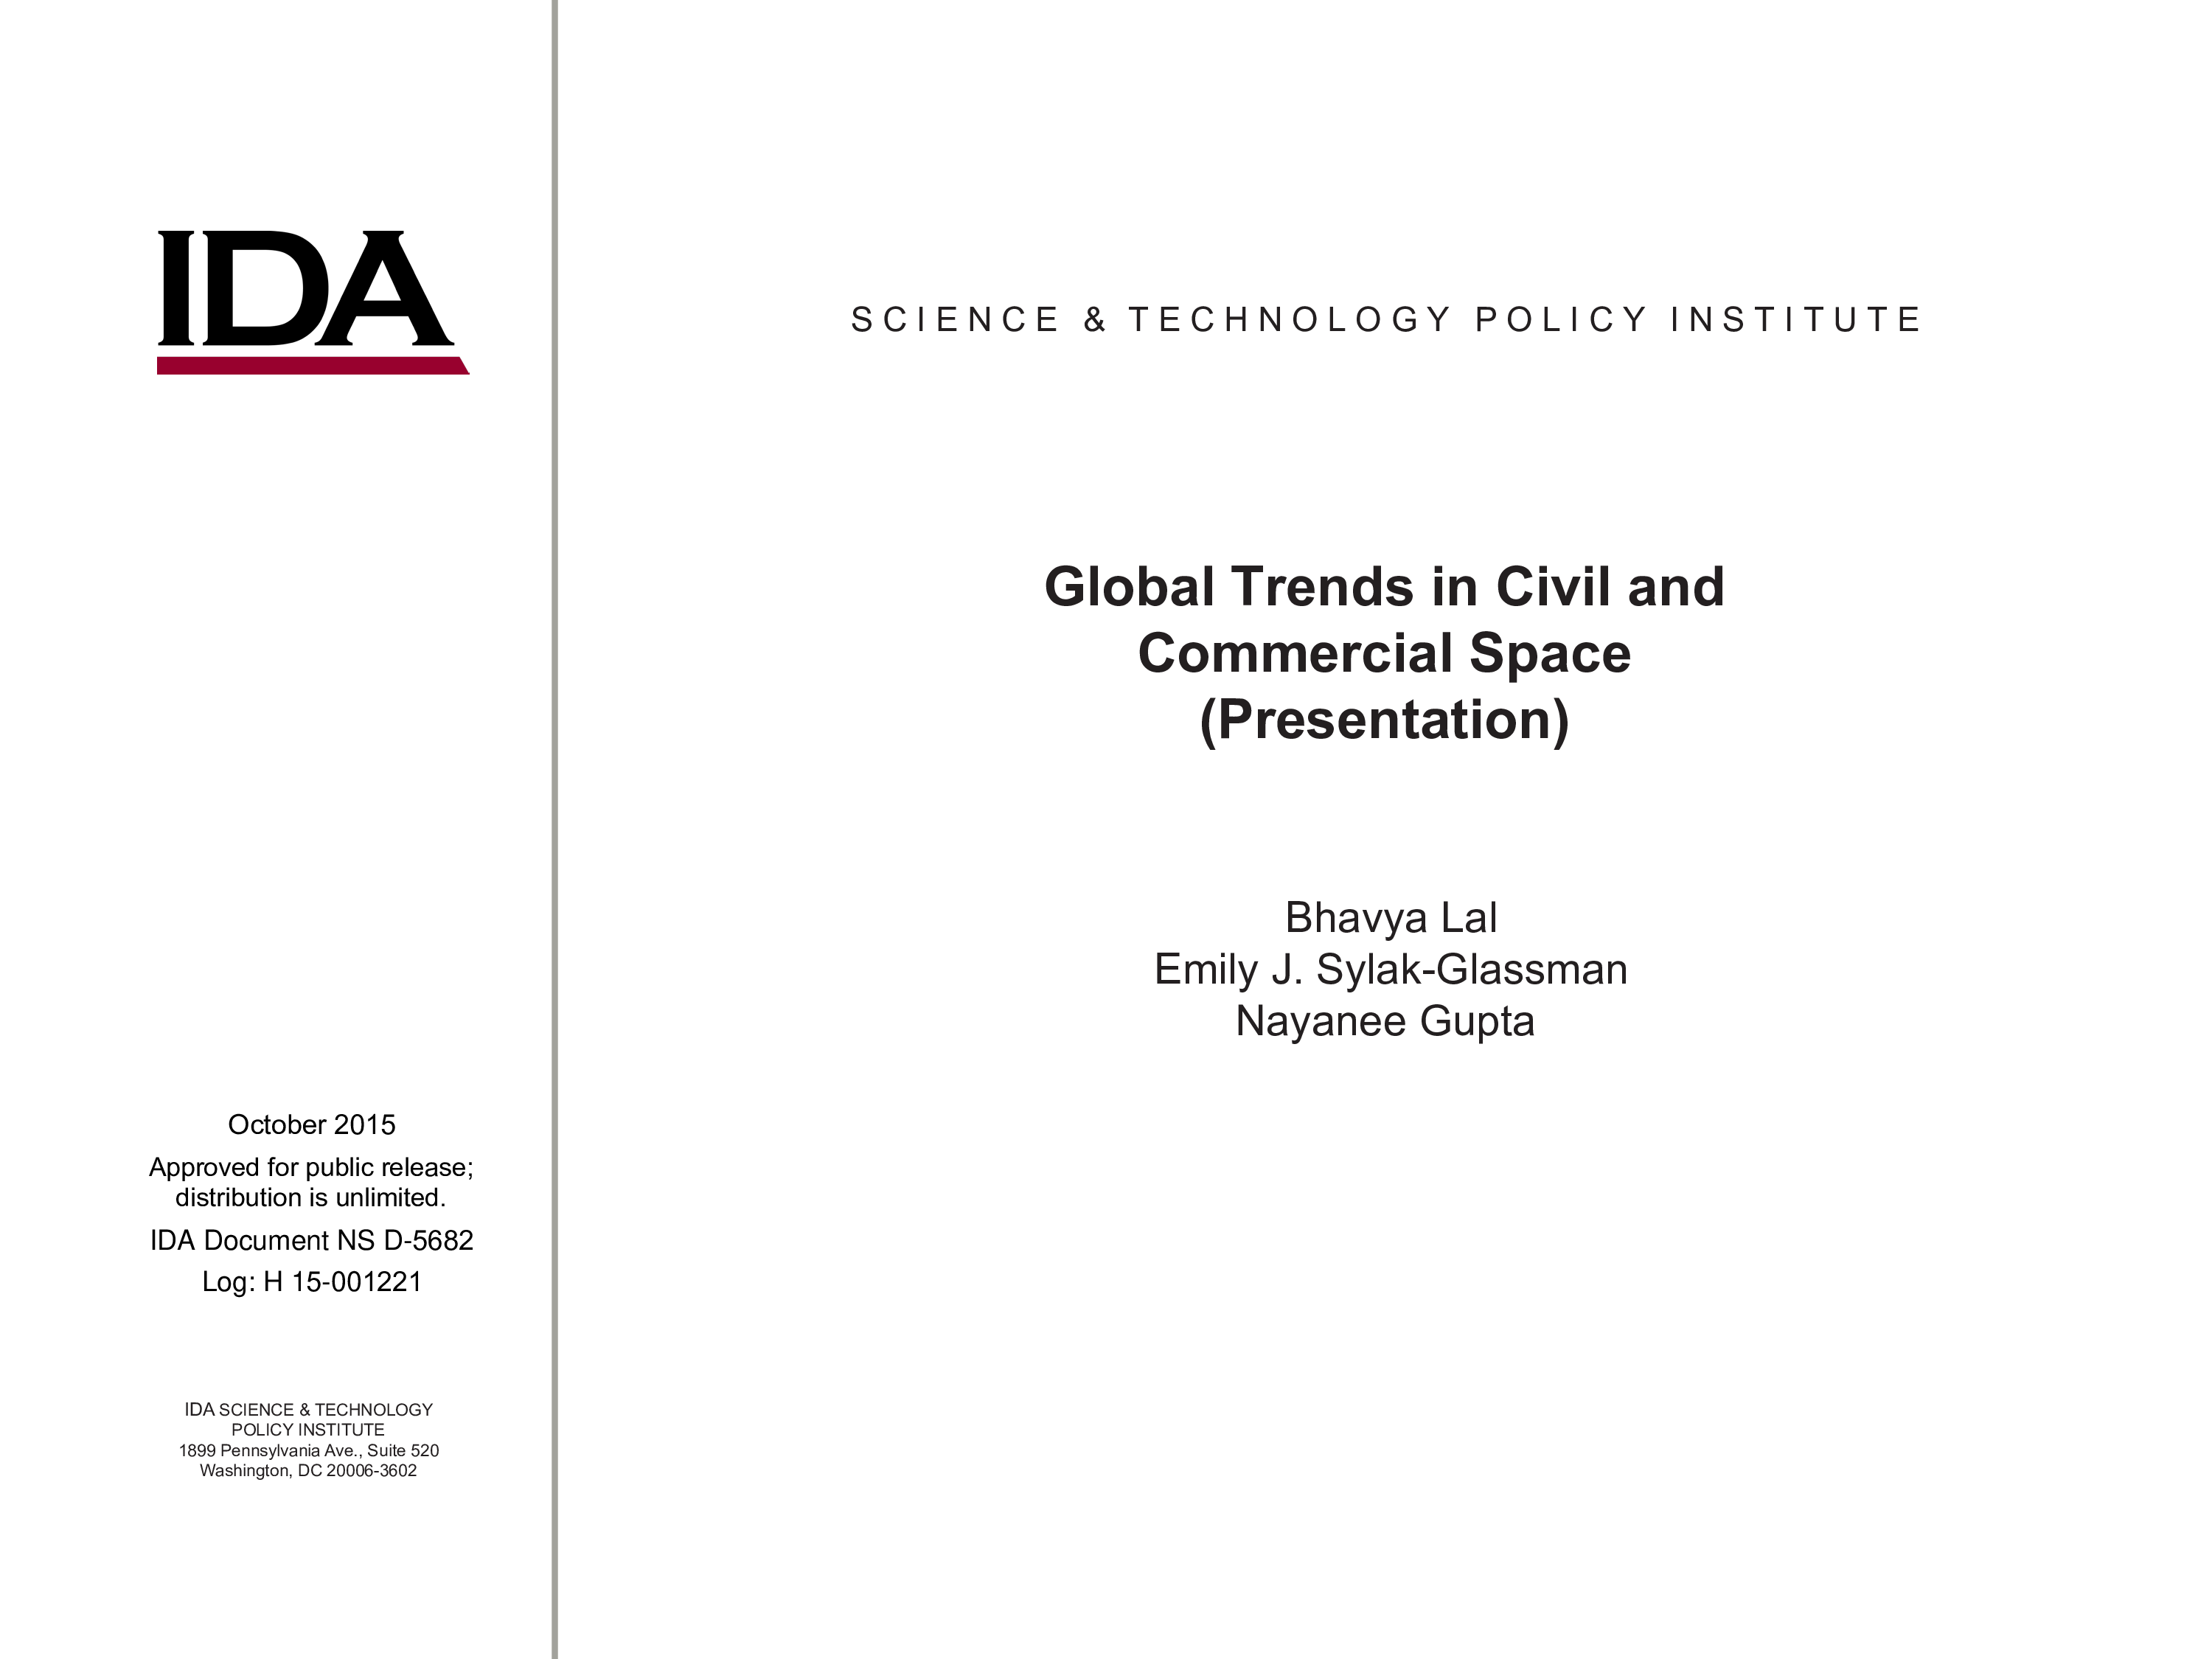 Global Trends in Civil and Commercial Space (Presentation)